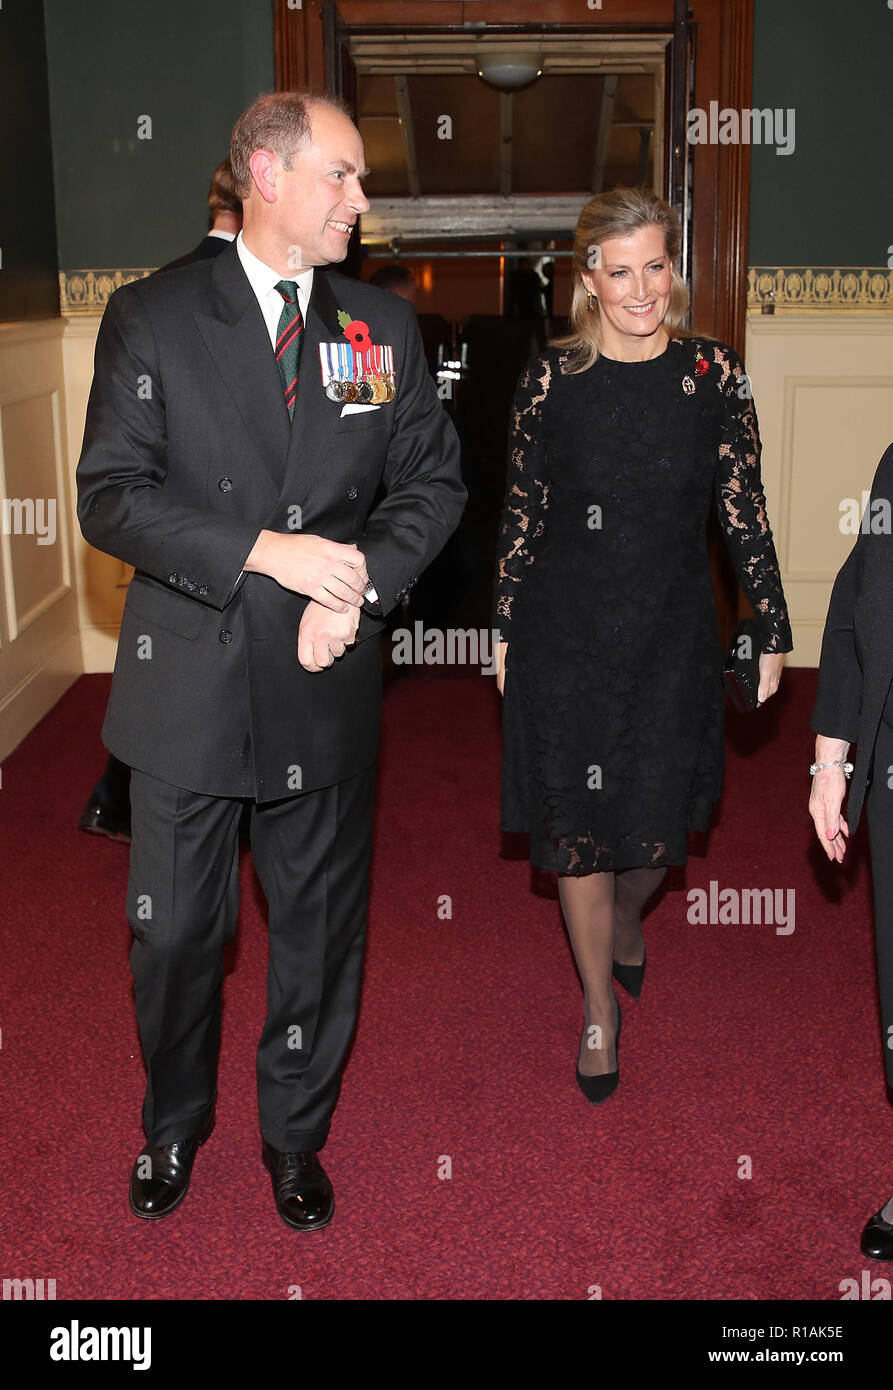 sophie-countess-of-wessex-and-the-earl-of-wessex-arrive-for-the-annual-royal-british-legion-festival-of-remembrance-at-the-royal-albert-hall-in-london-which-commemorates-and-honours-all-those-who-have-lost-their-lives-in-conflicts-R1AK5E.jpg